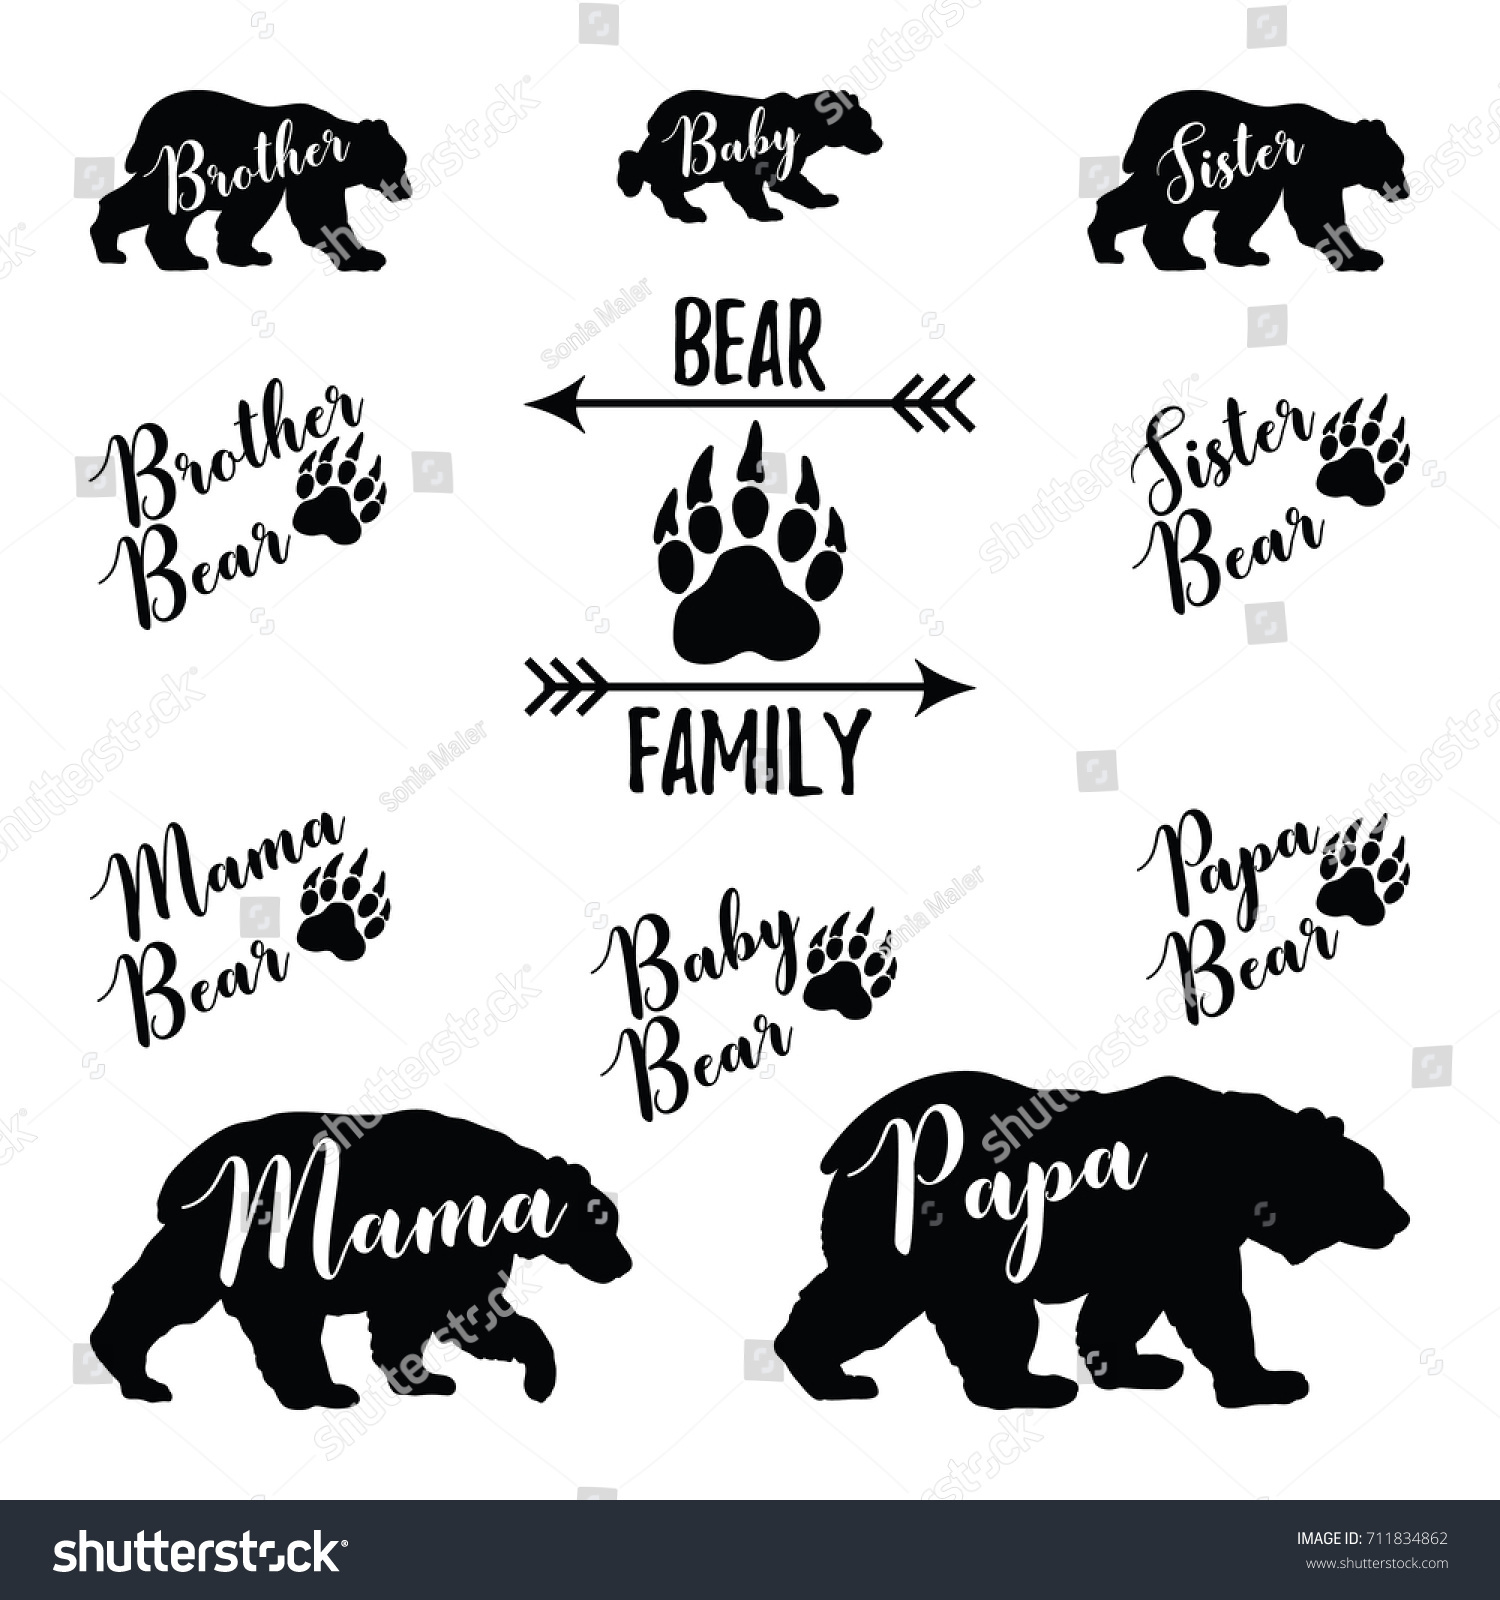 SVG of Bear Family bundle set.Papa,Mama,Baby,Brother,Sister bear lettering with paw and arrow. svg